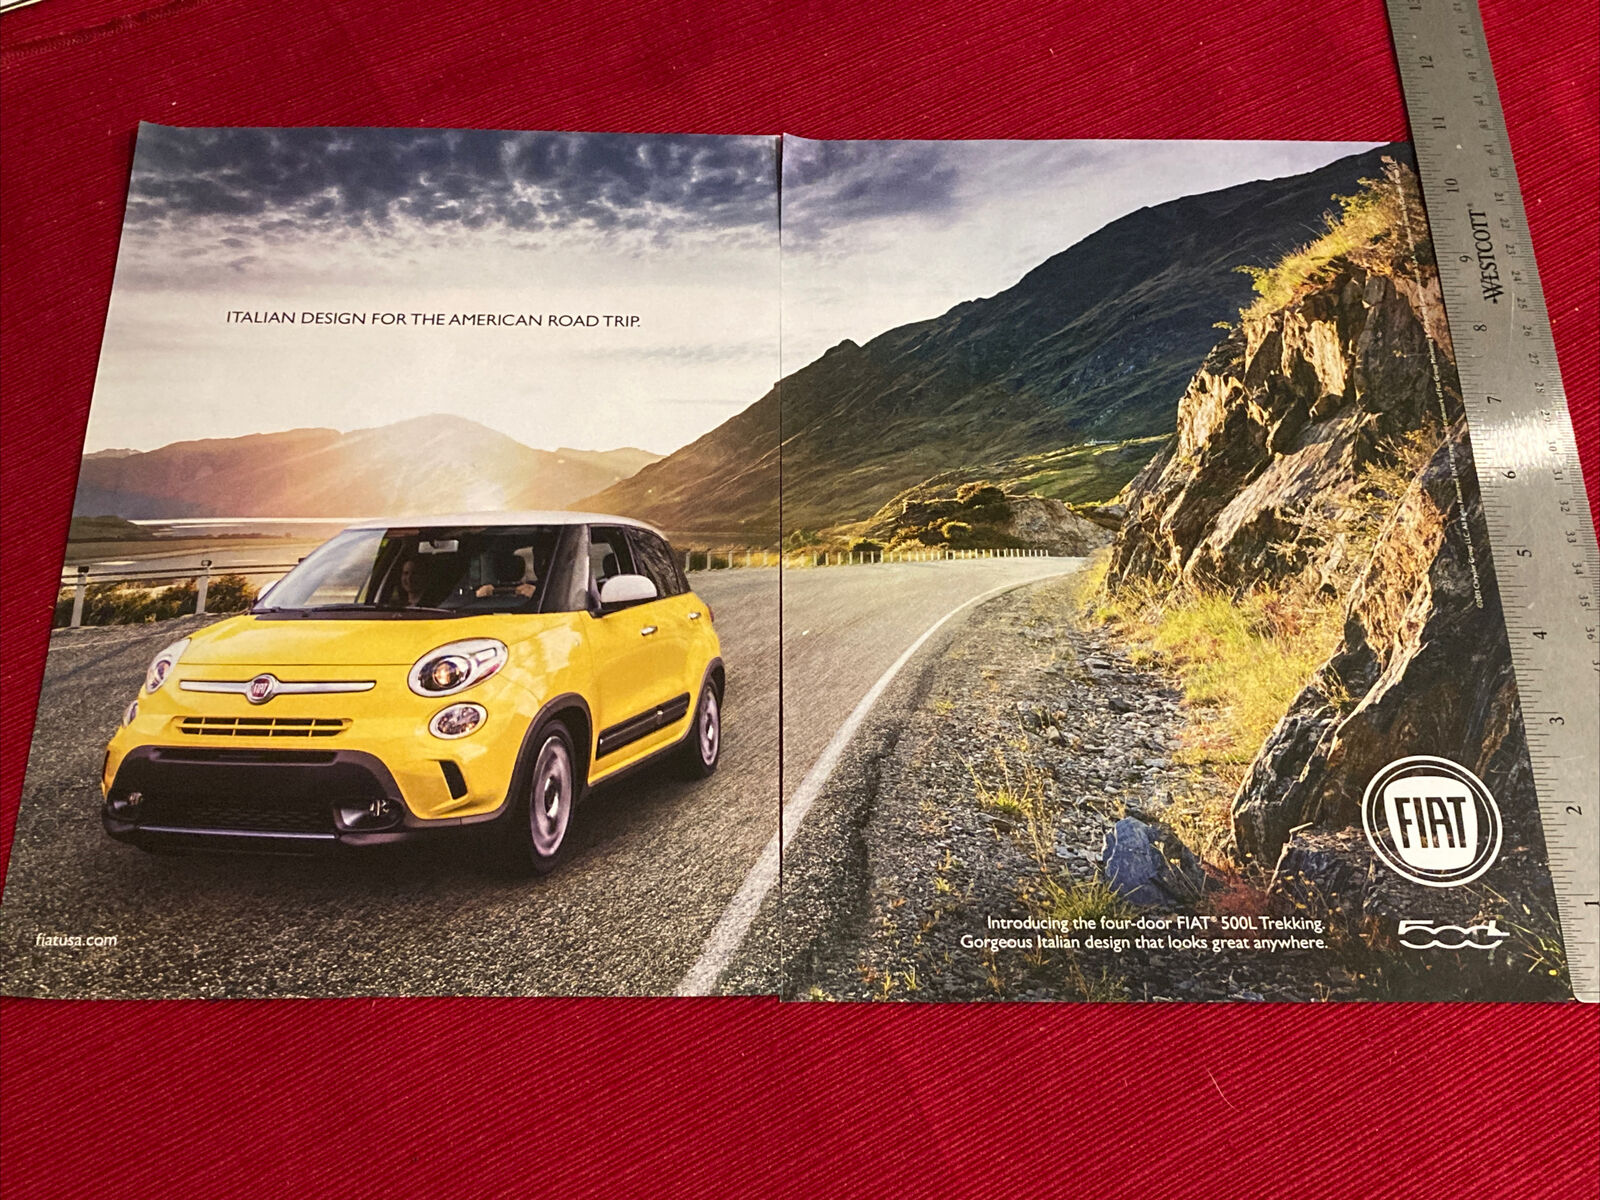 2013 Fiat 500L Trekking Car 2-page Print Ad - Great To Frame